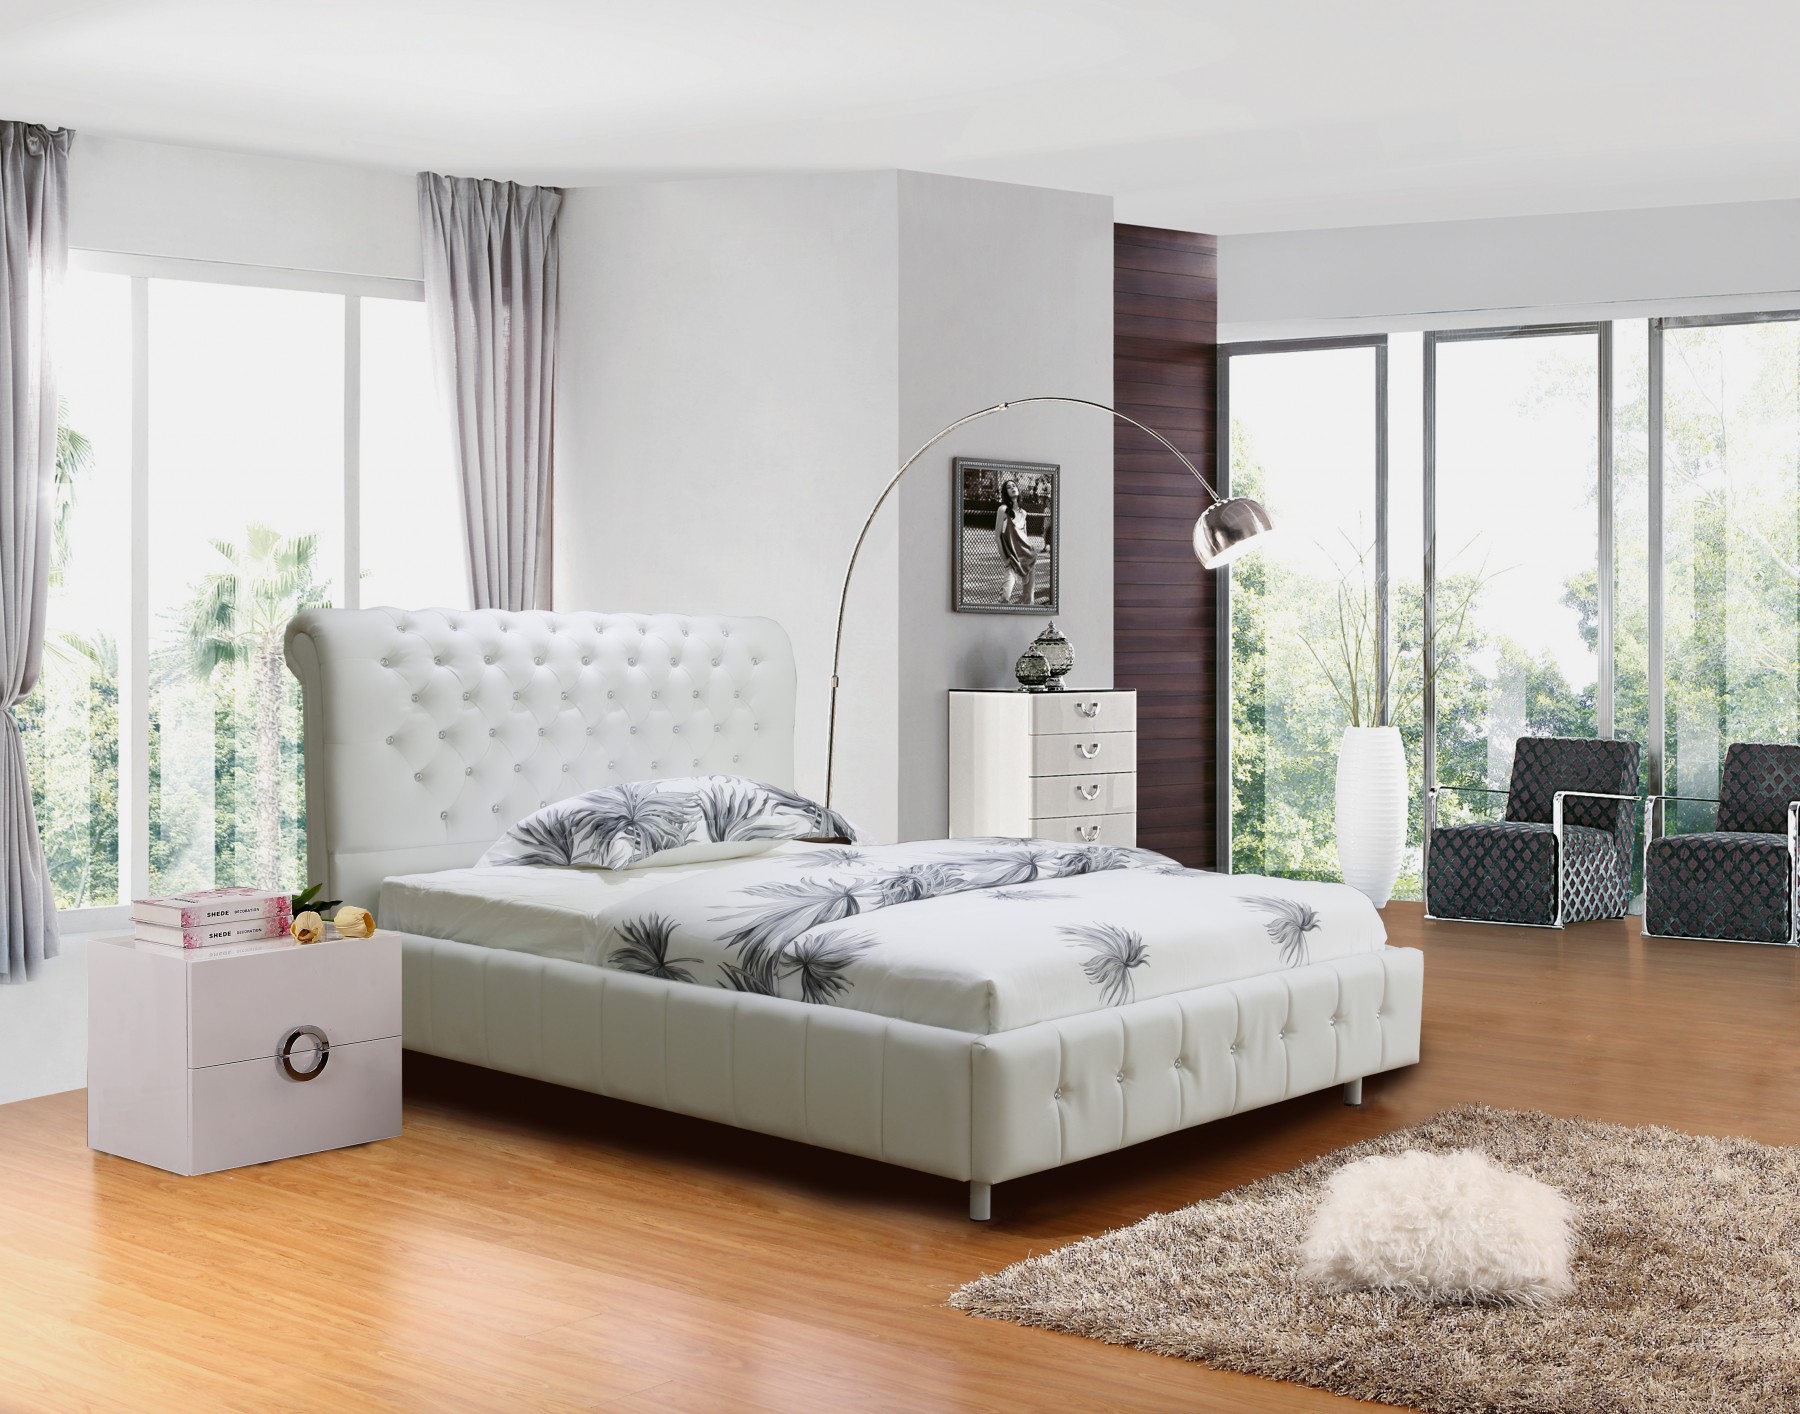 Avalon Pu Leather Bed King Size White, White Leather Bed King